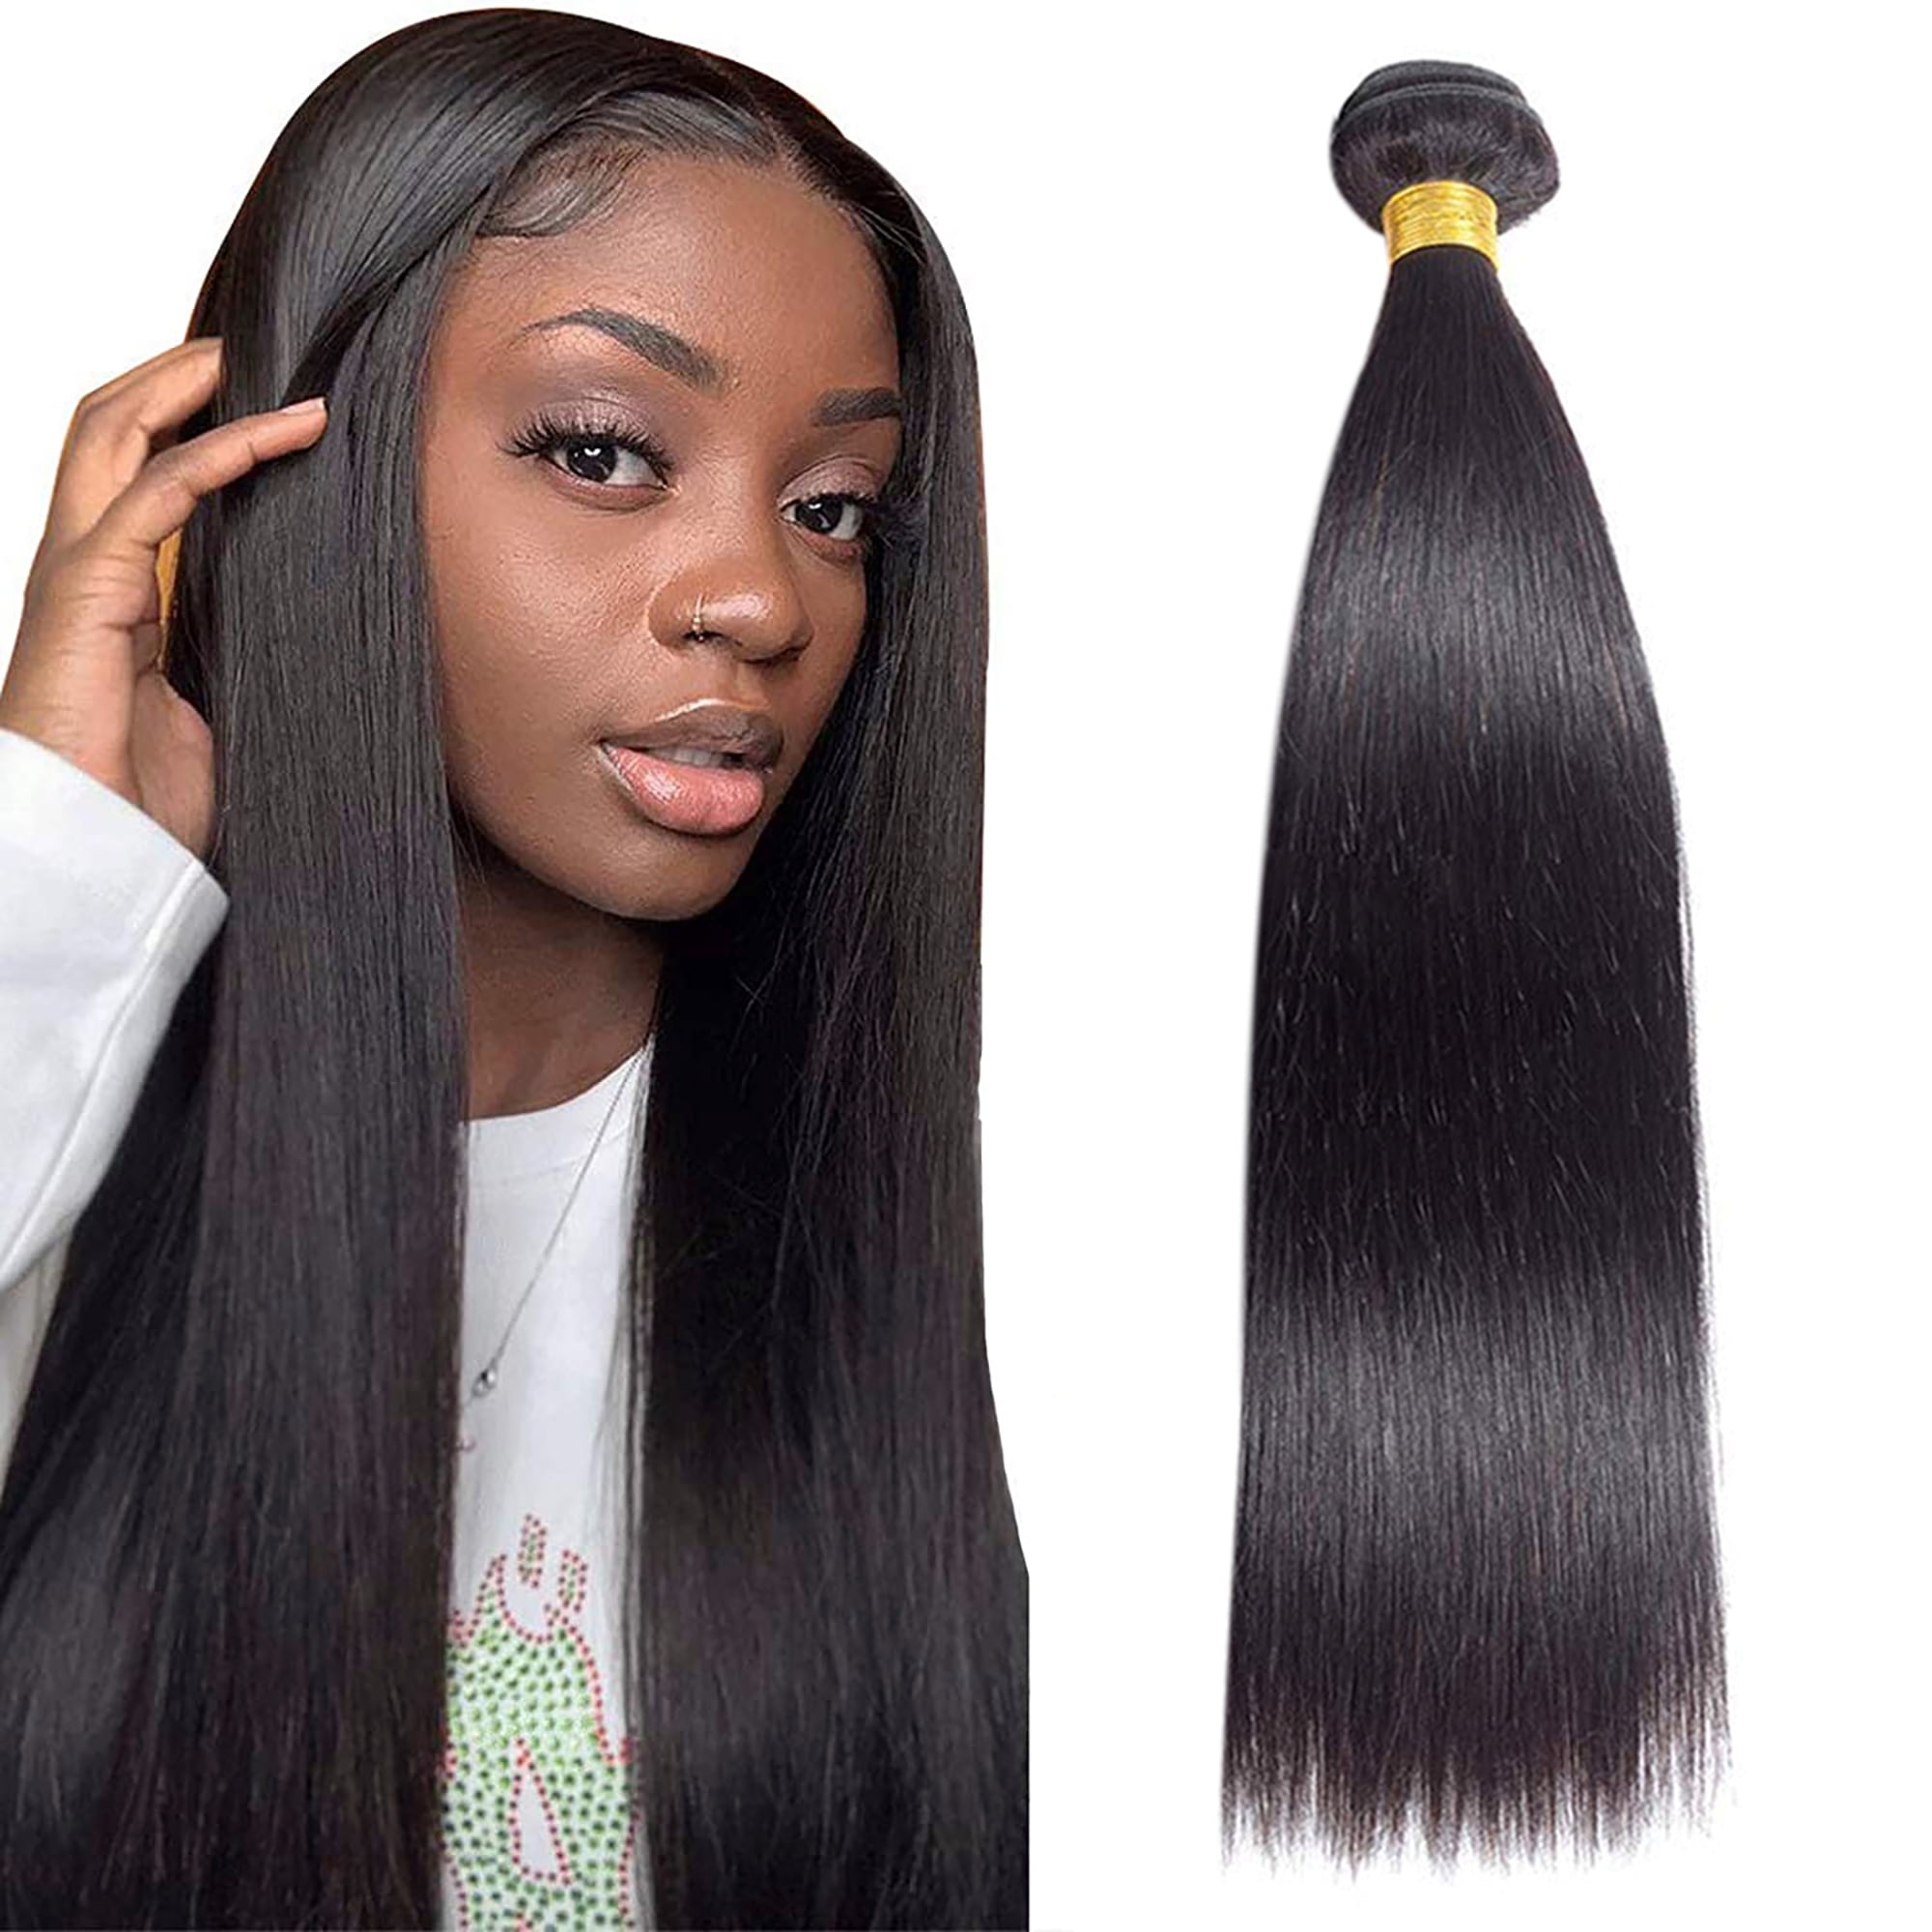 Full Shine Weft Hair 12 inch Sew in Hair Extensions Off Black Hair Weave  80g Silky straight Remy Hair Wefts 